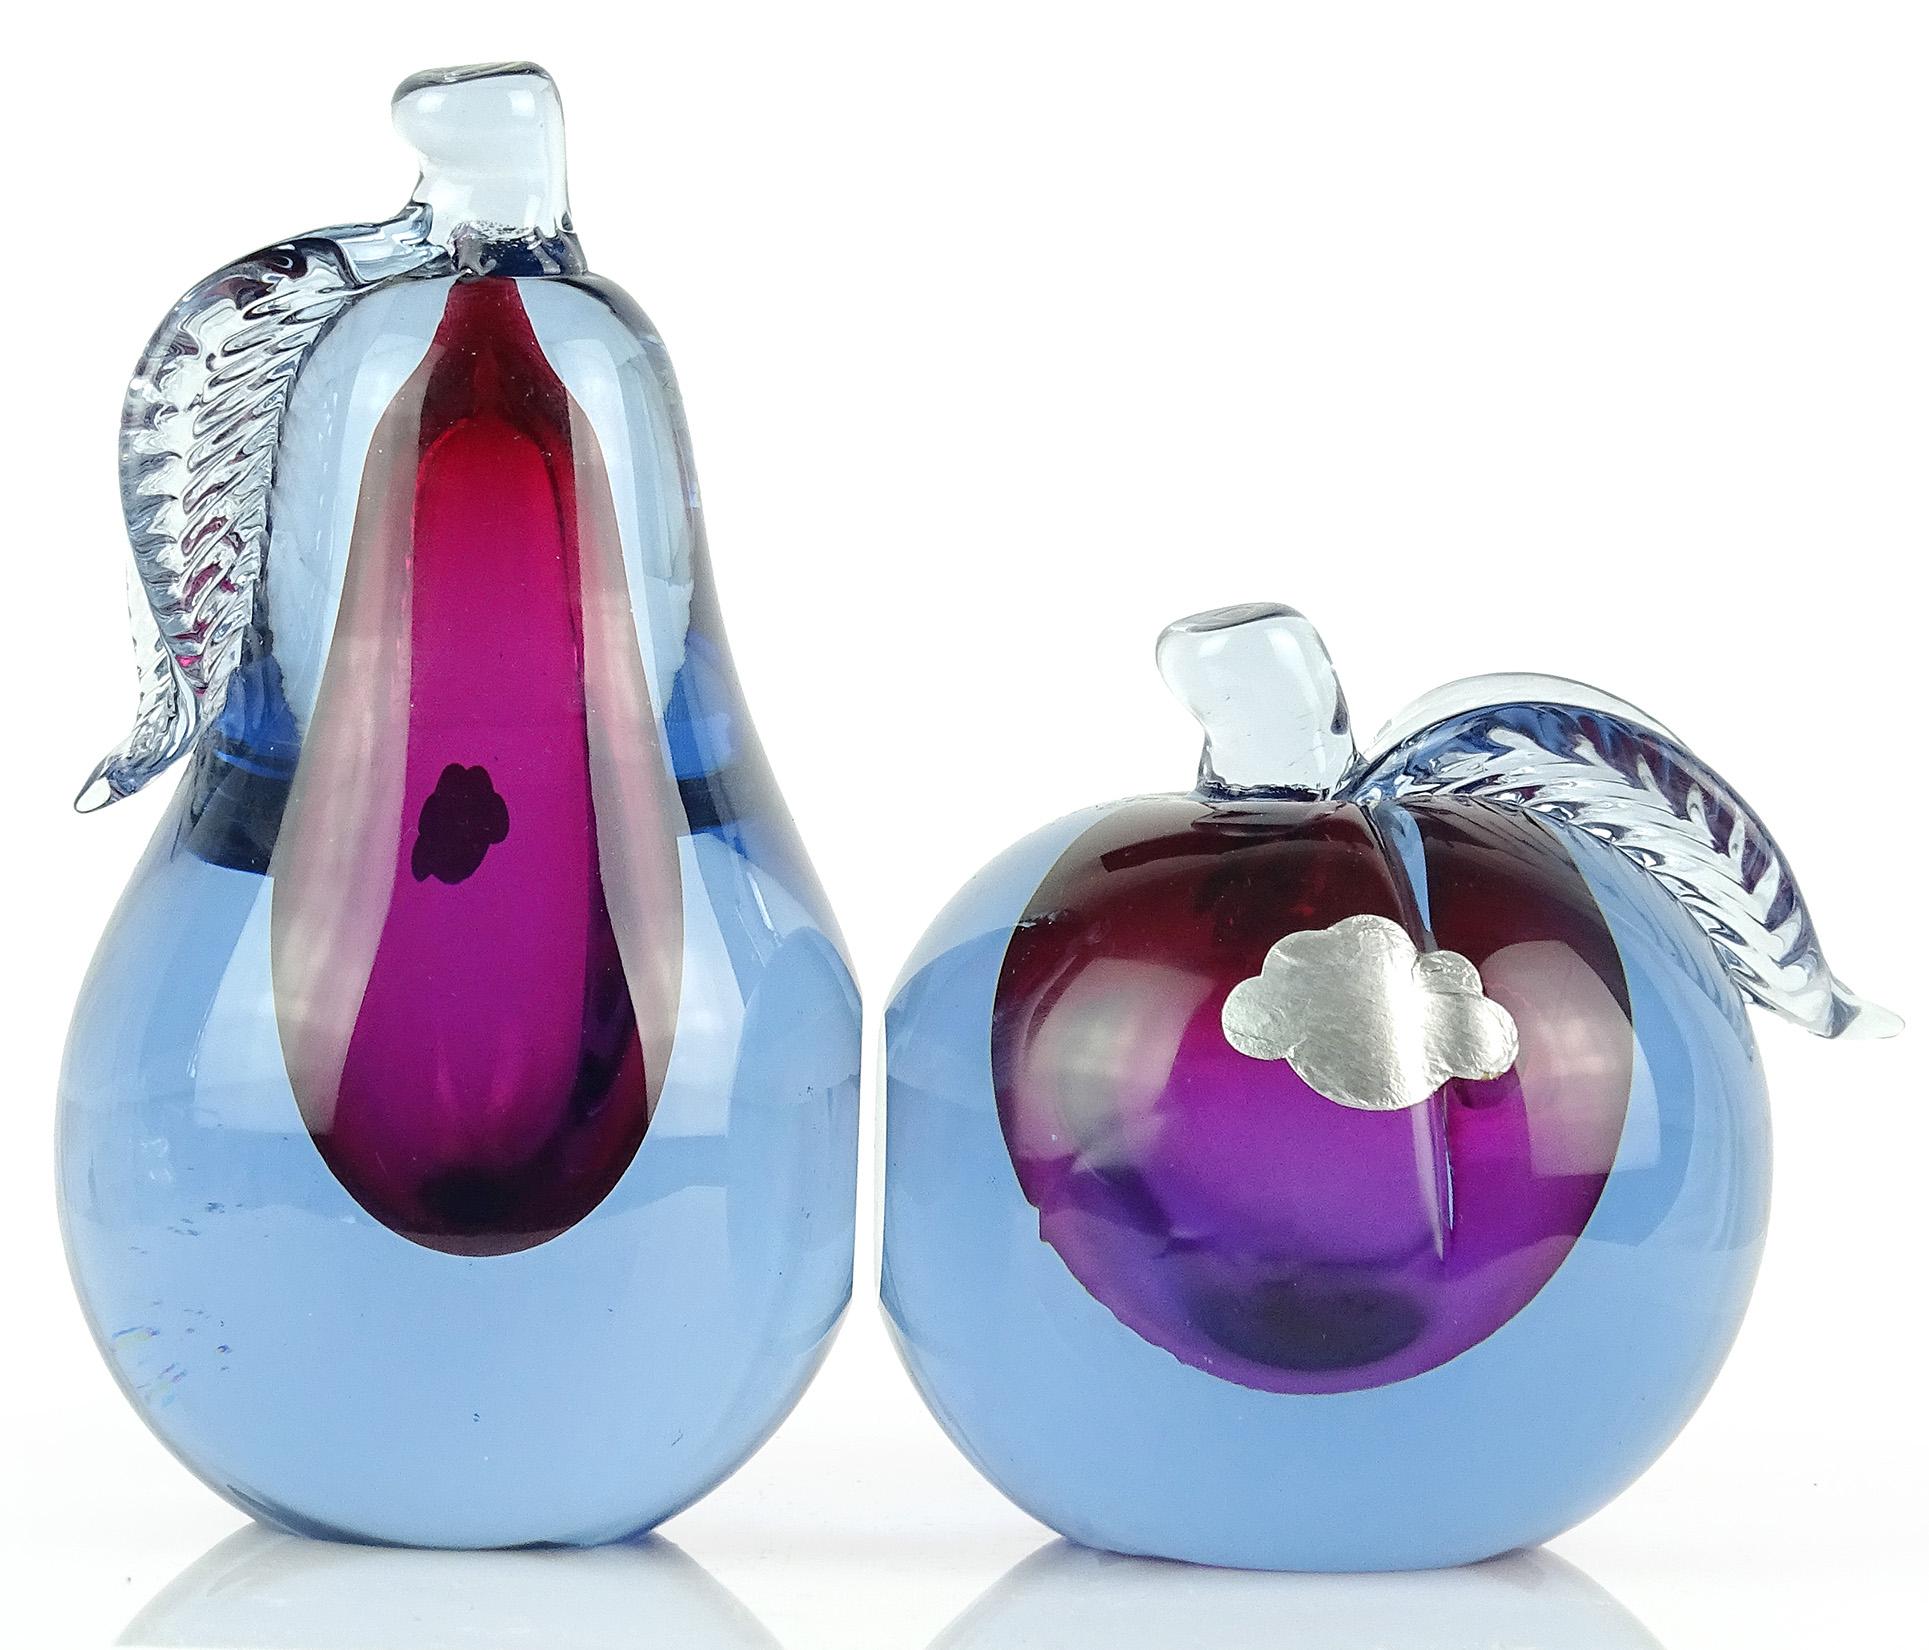 Beautiful vintage Murano hand blown, Sommerso blue over purple art glass pear and apple fruit bookends. Documented to designer Alfredo Barbini, circa 1950-1960. Original labels still attached (but worn), as well as item number labels underneath. The